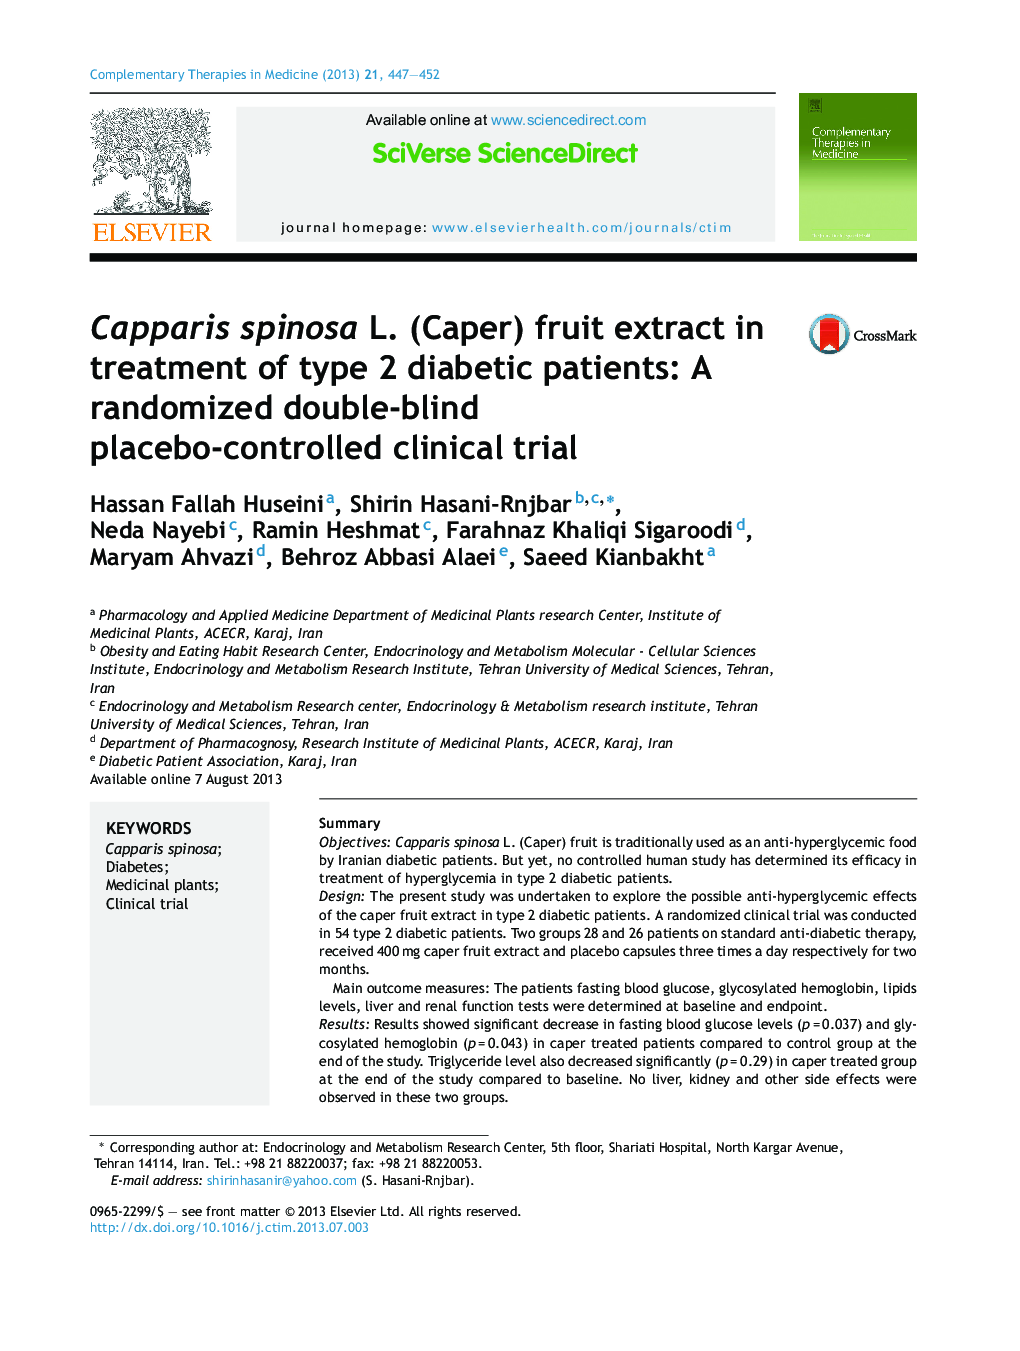 Capparis spinosa L. (Caper) fruit extract in treatment of type 2 diabetic patients: A randomized double-blind placebo-controlled clinical trial